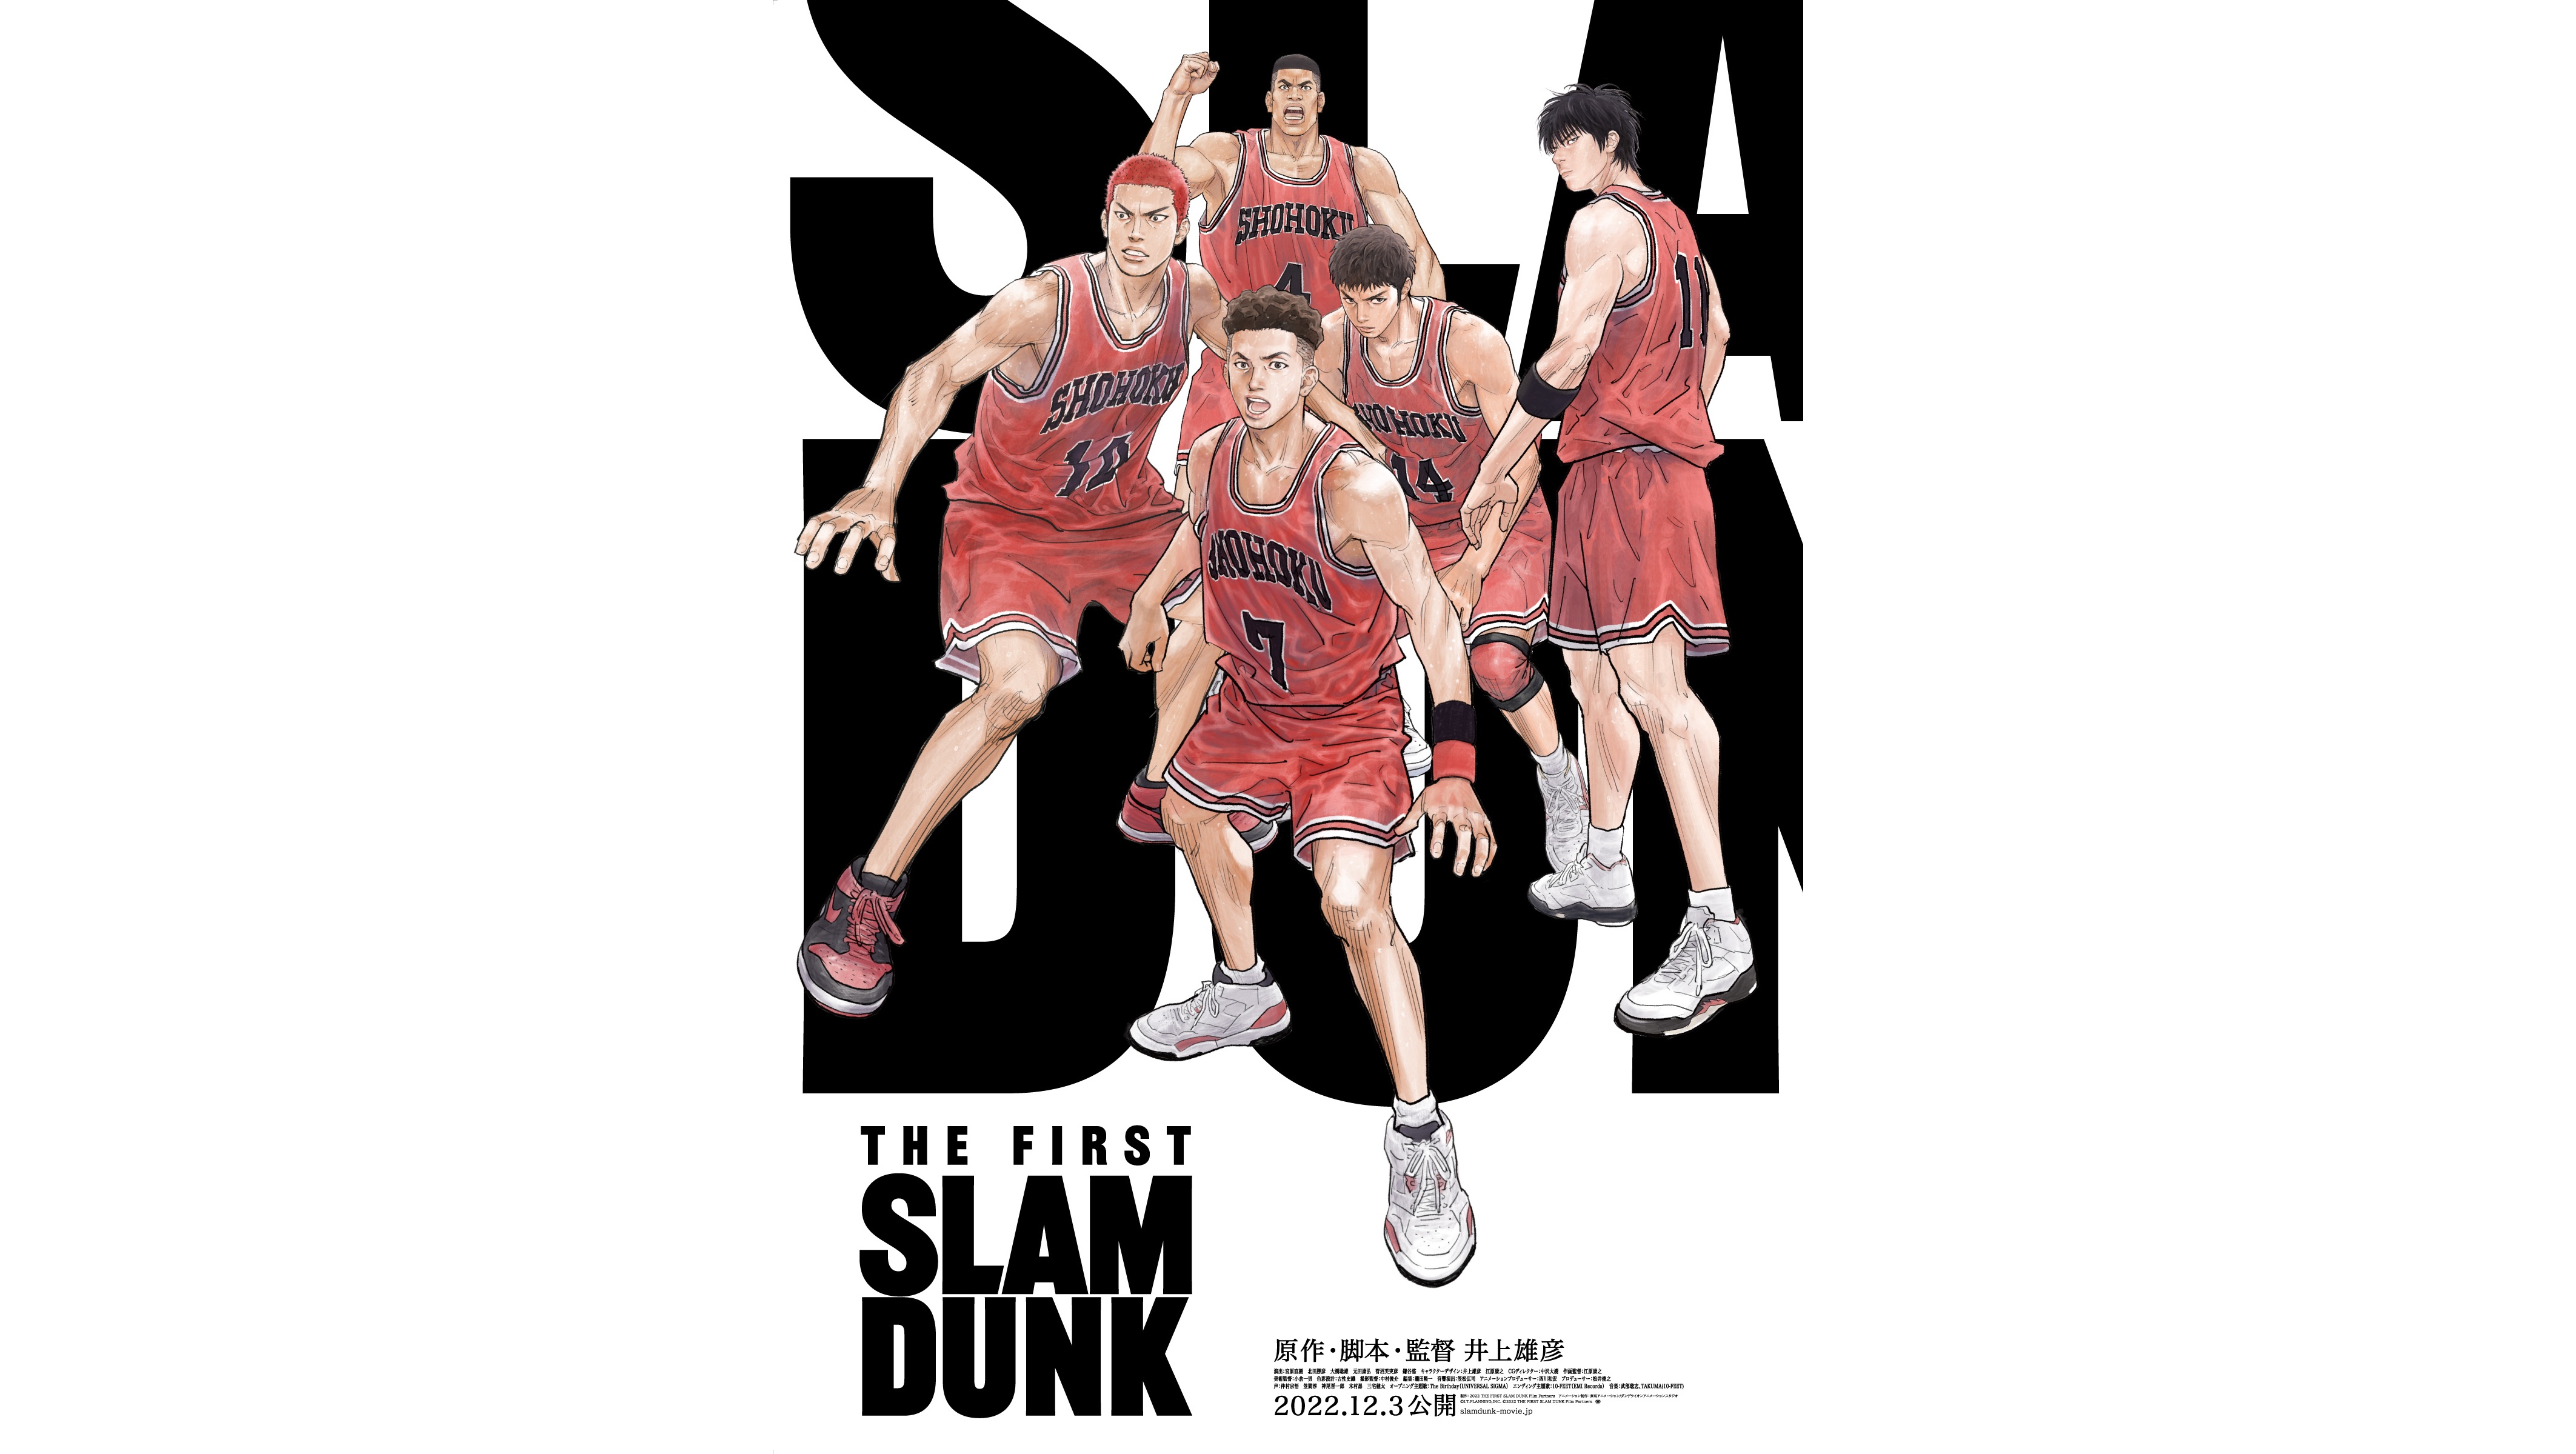 All Slam Dunk movie changes from manga to anime | ONE Esports